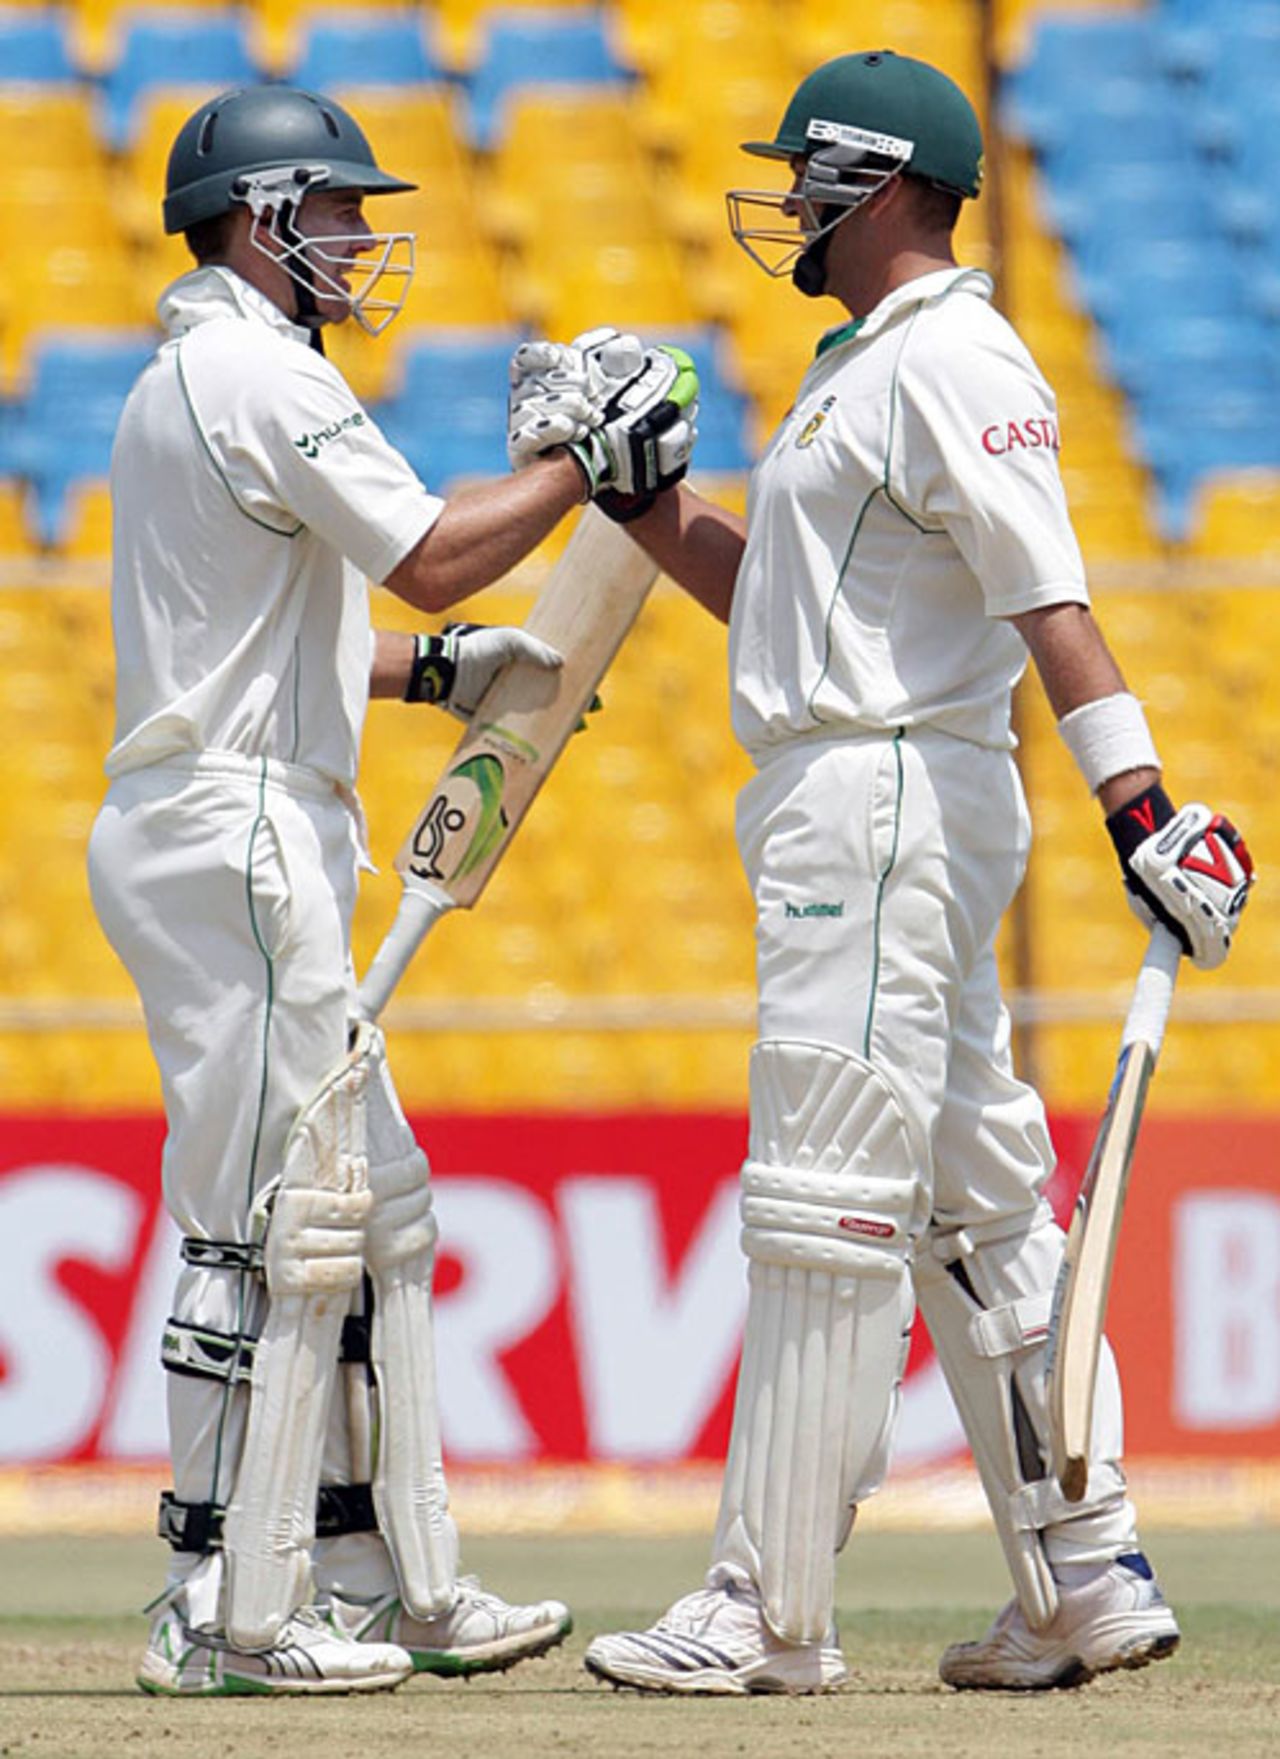 Jacques Kallis and AB de Villiers added 256 together, India v South Africa, 2nd Test, Ahmedabad, 2nd day, April 4, 2008